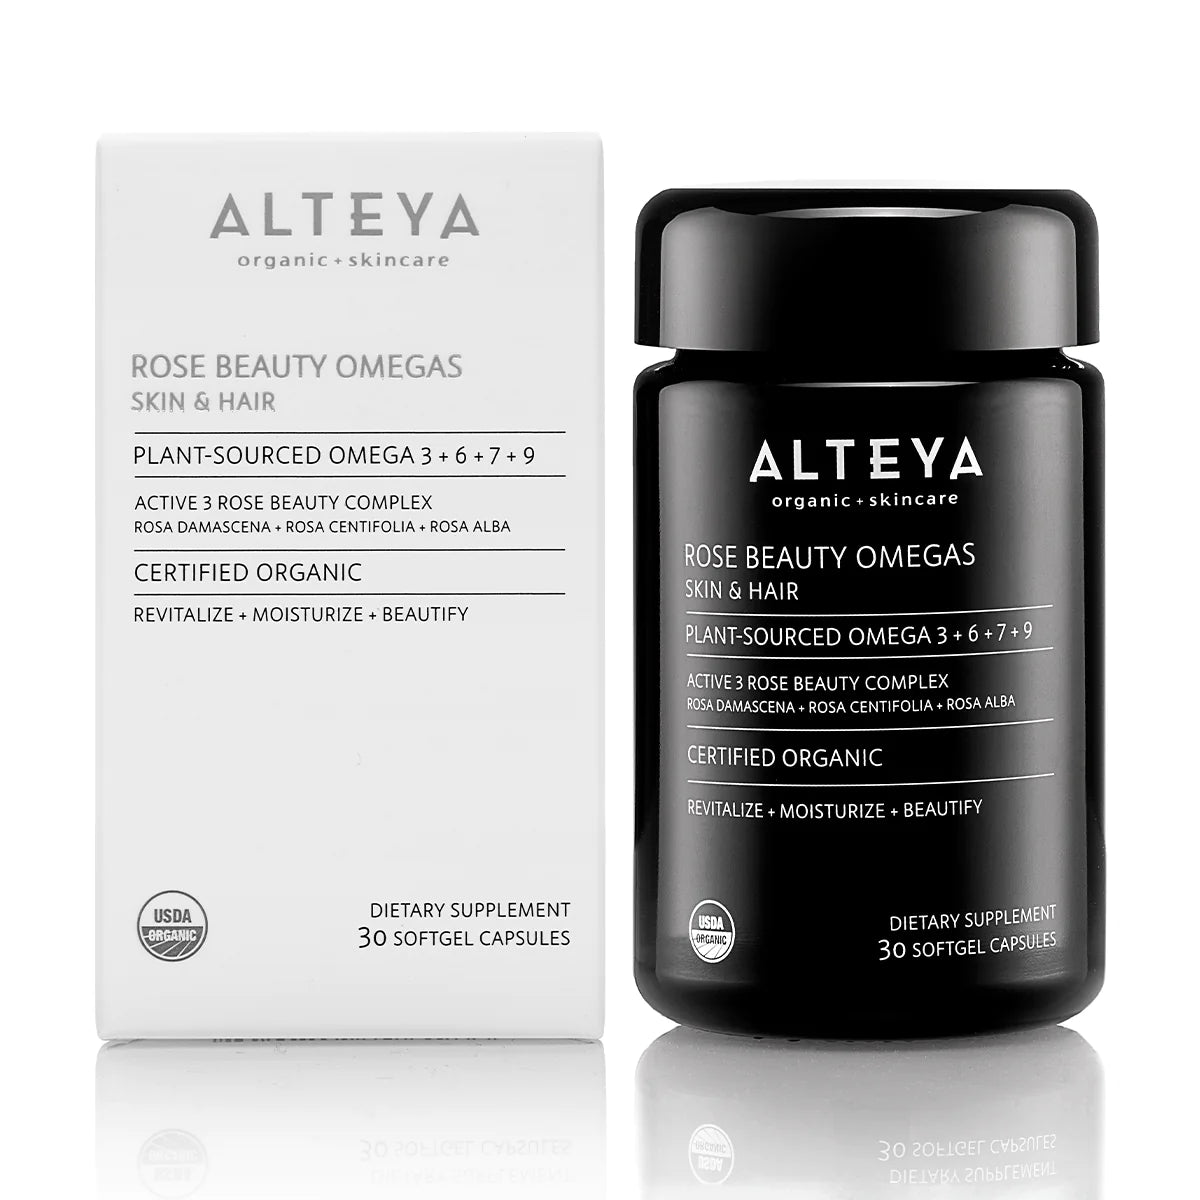 Alteya Rose Beauty Omegas Skin &amp; Hair Organic Supplement are a natural and organic solution for enhancing the health of your skin and hair.